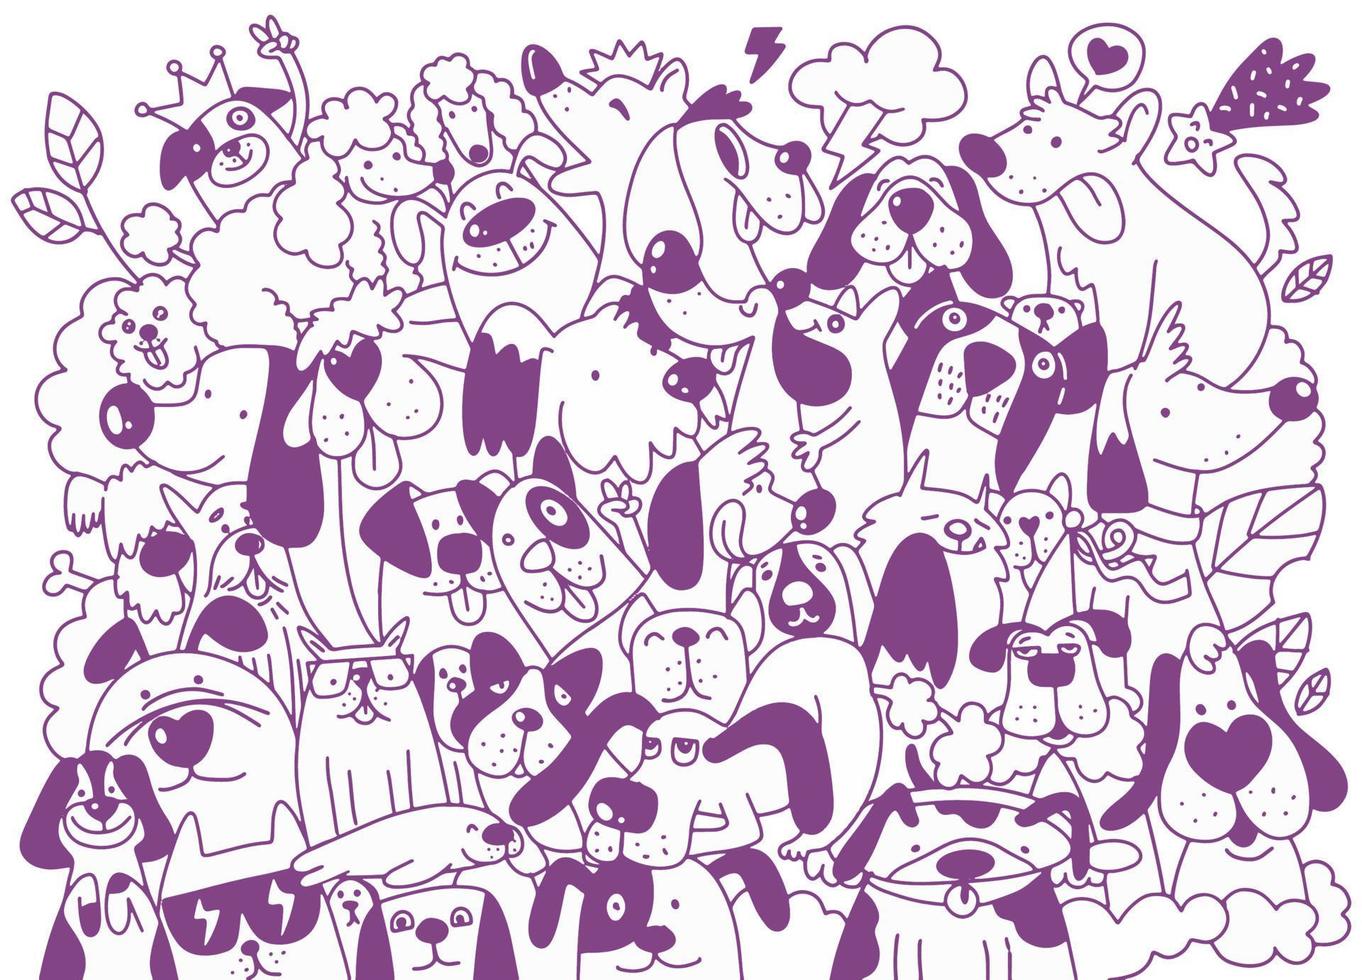 The pattern features little doodle puppies. Illustration in vect vector